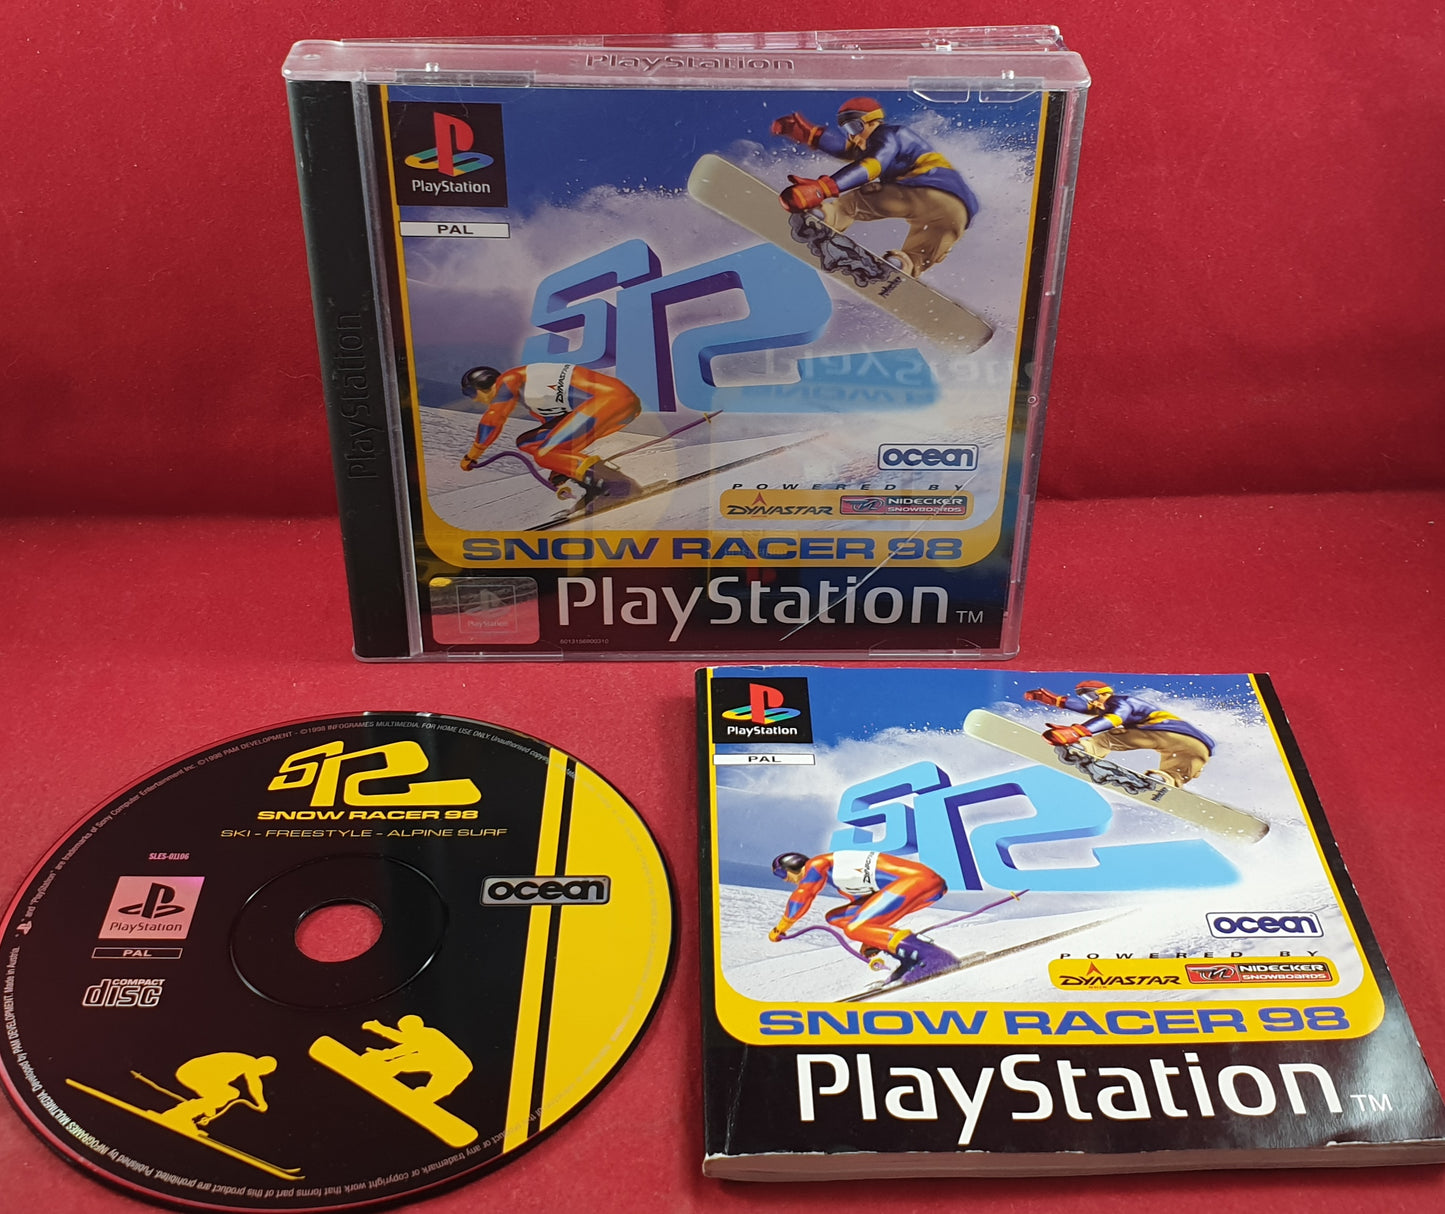 Snow Racer 98 Sony Playstation 1 (PS1) Game